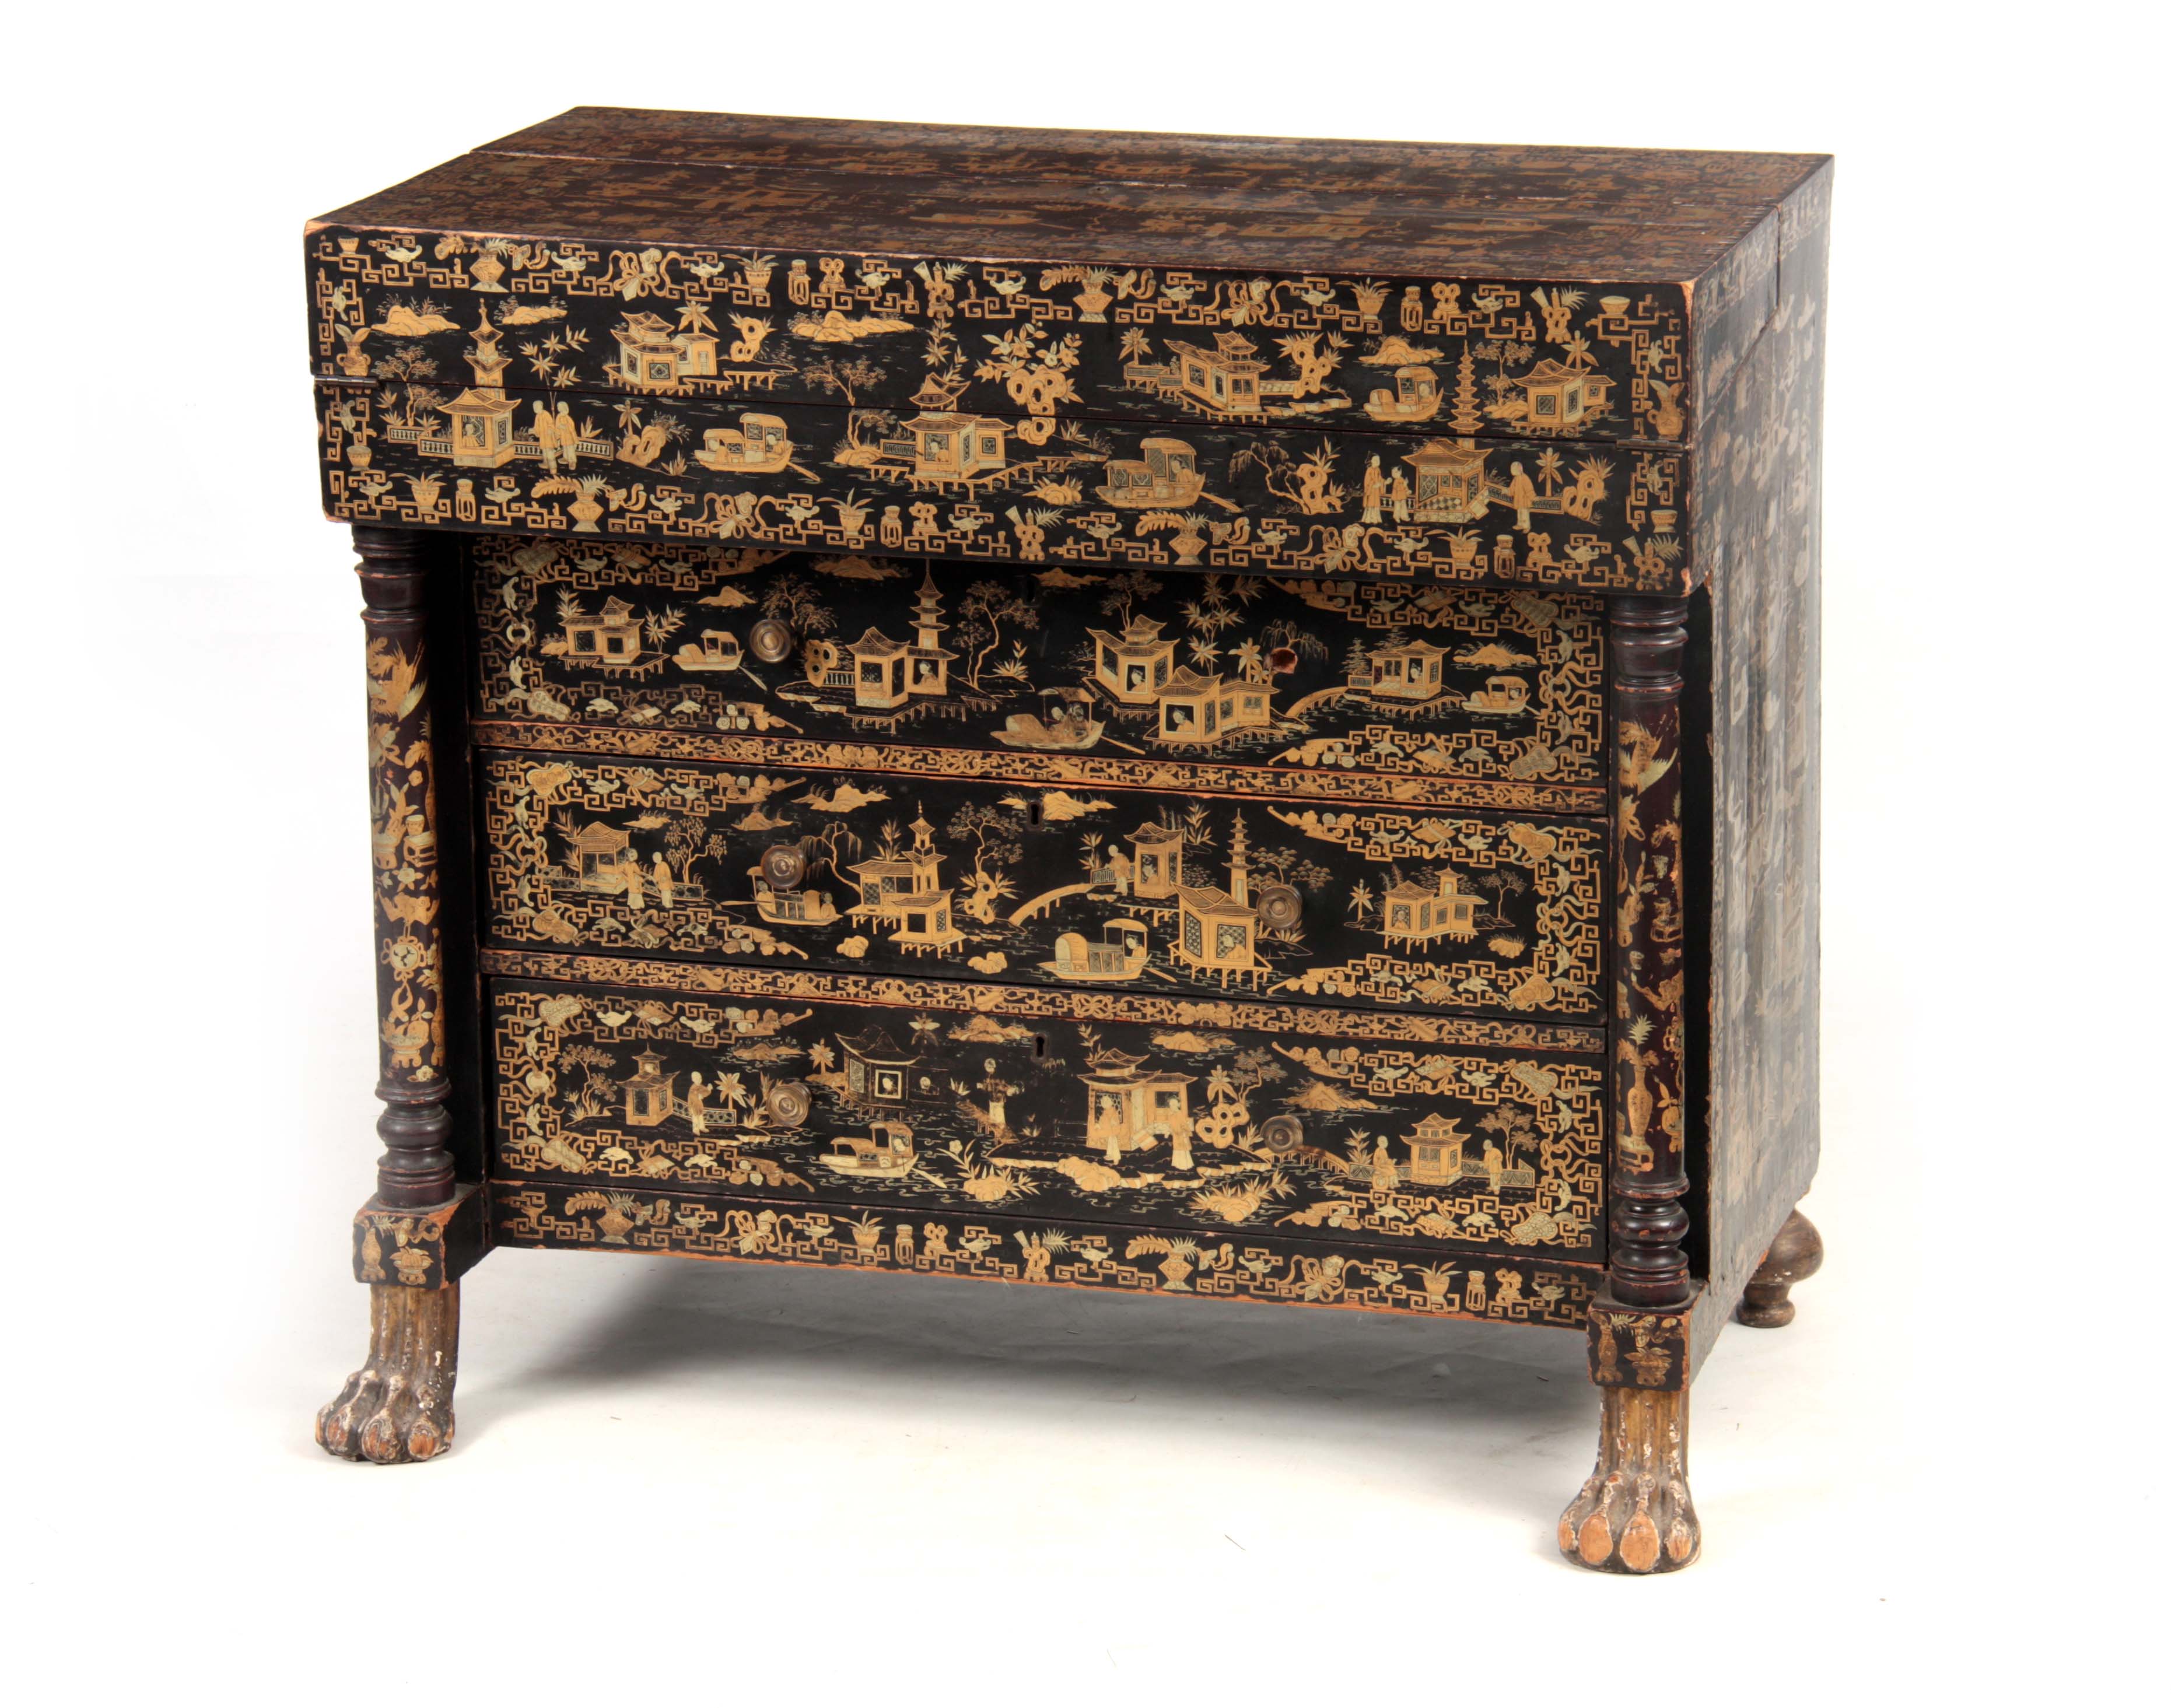 AN UNUSUAL 19TH CENTURY ANGLO CHINESE LACQUERED SECRETAIRE CHEST decorated with pagodas and